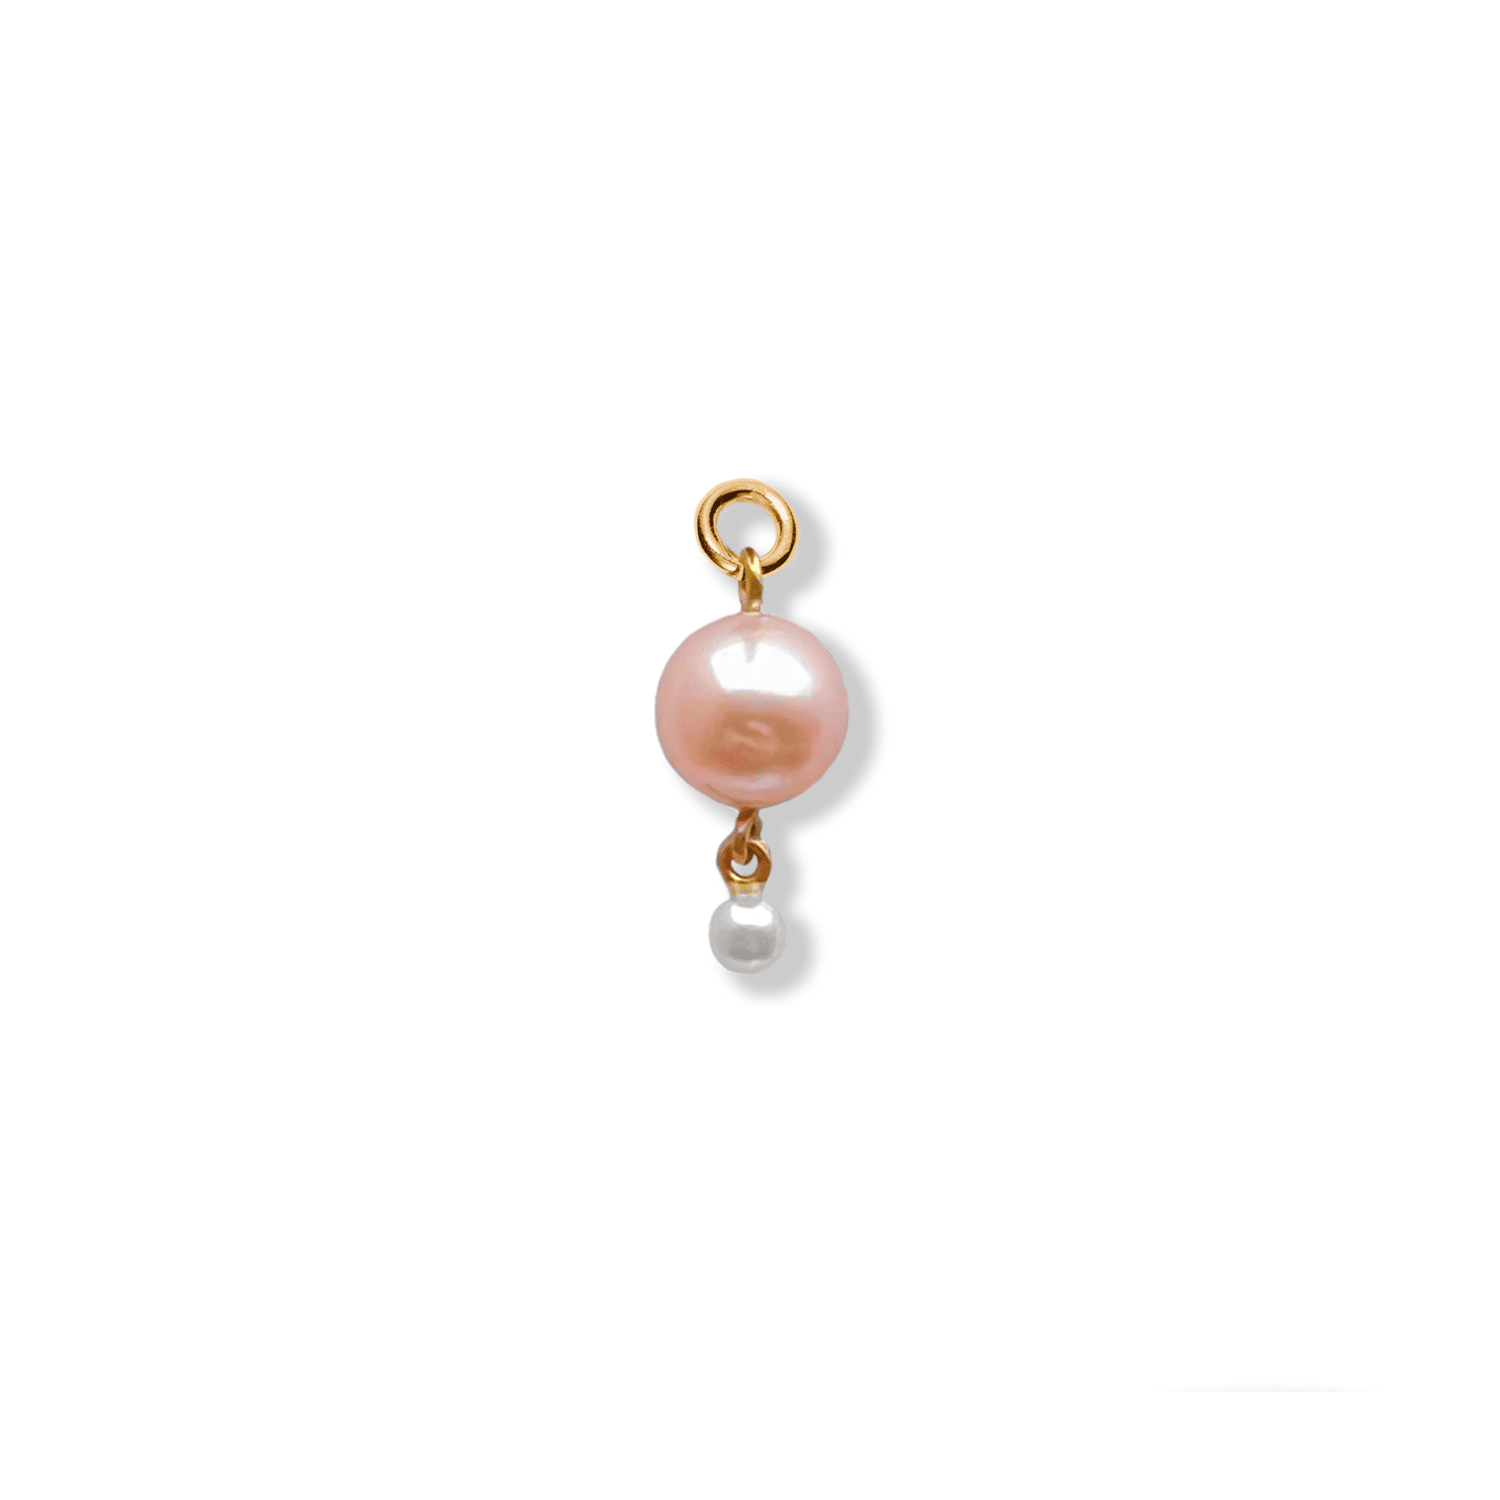 PENDANT TWO PEARL pink pearl pendant for earrings